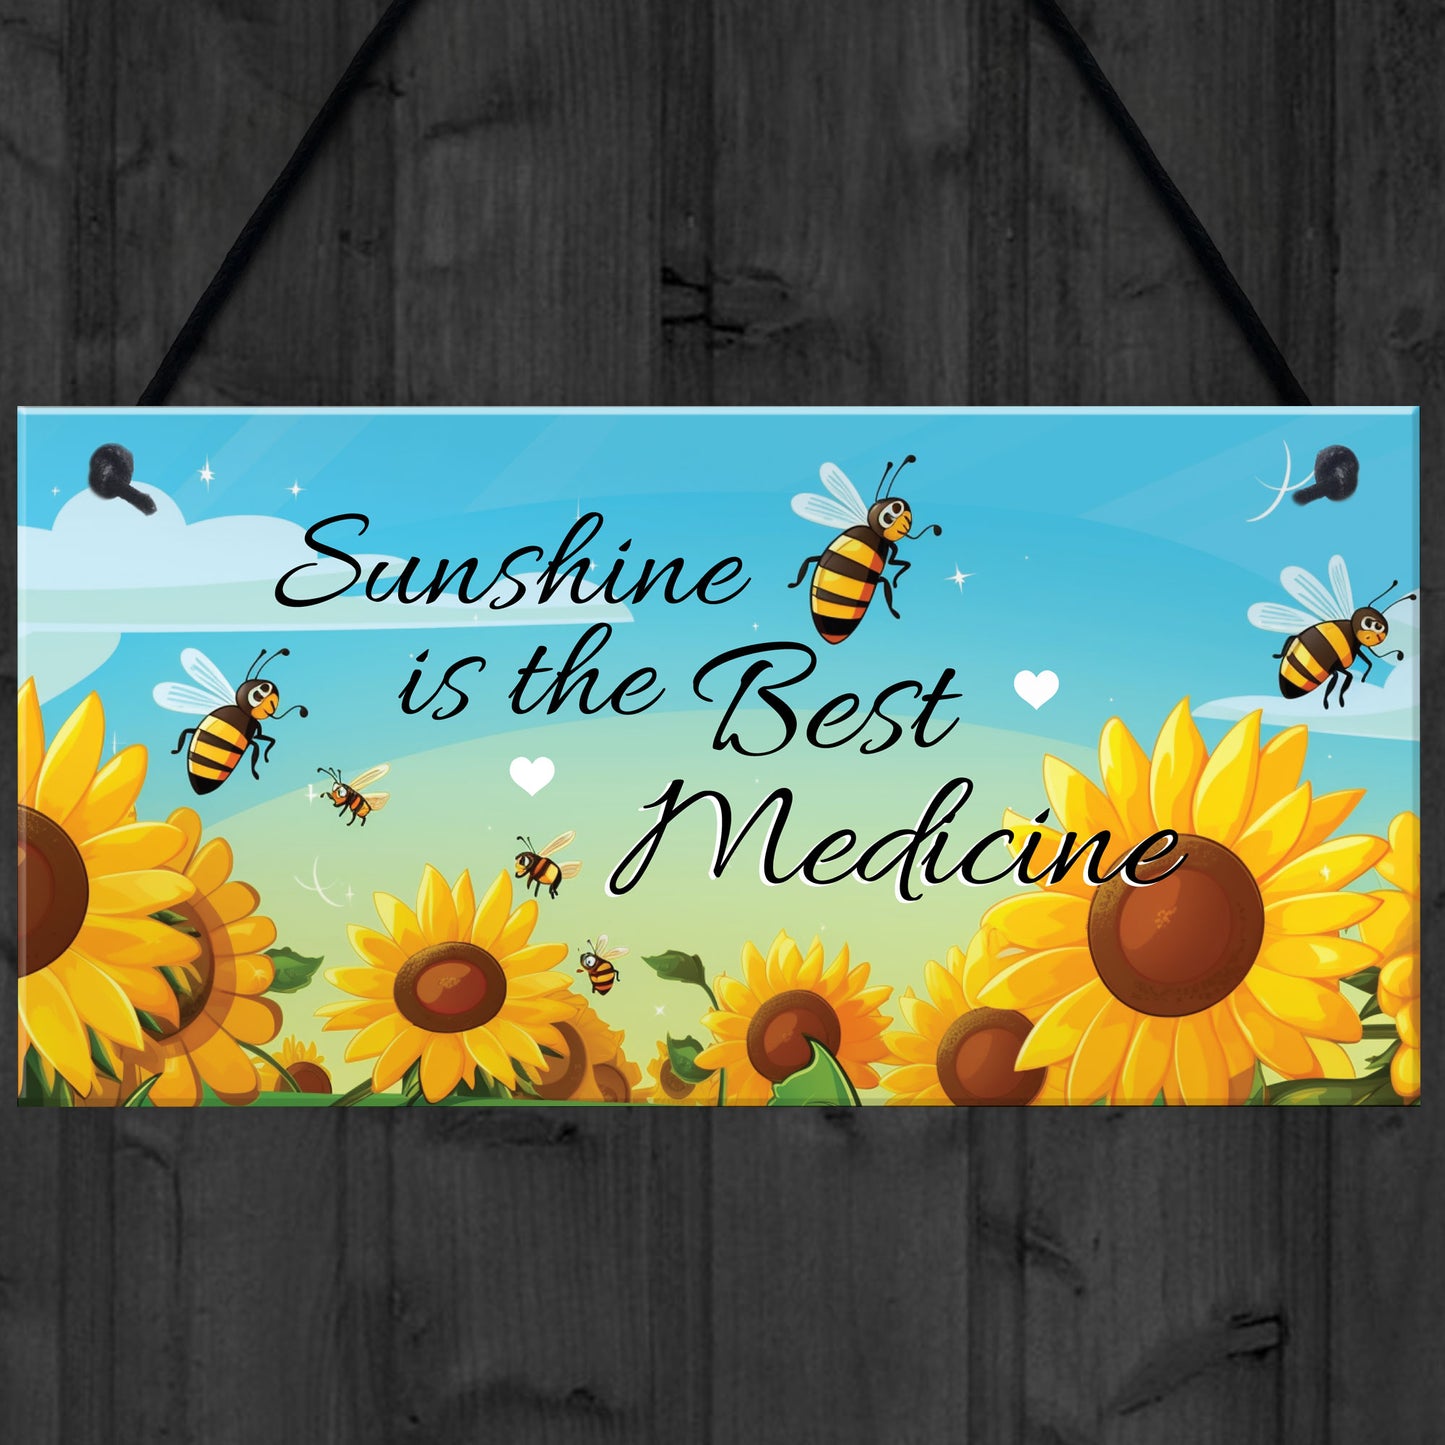 Shabby Chic Sunshine Sign Hot Tub Plaque Garden Shed Summerhouse